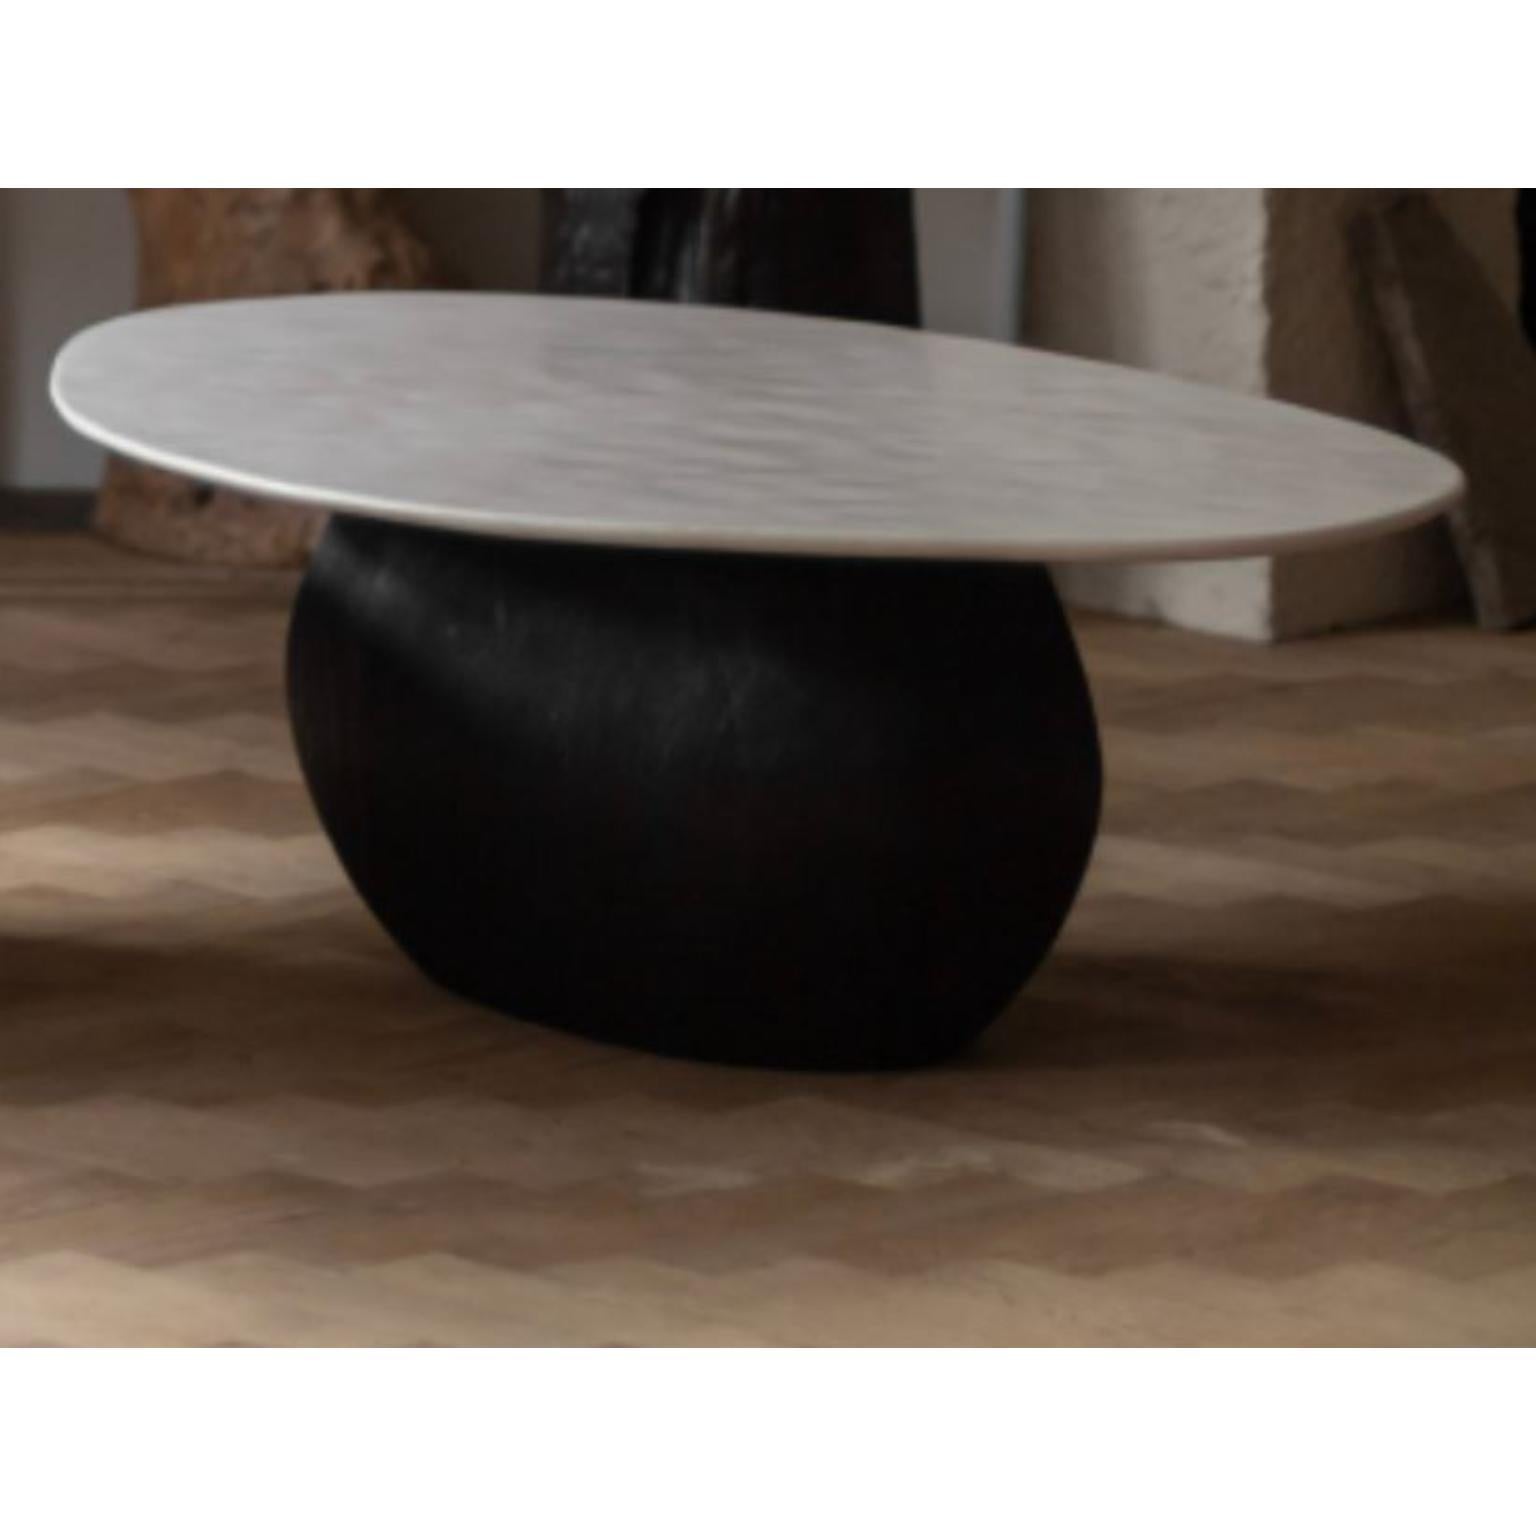 Silk Wood Low Table by Atelier Benoit Viaene
Dimensions: D 85 x W 170 x H 33 cm.
Materials: Wood.

Benoit Viaene is originally from Kortrijk and now works and lives in Ghent.
He is a graduated Architect of the Henry Van de Velde Institute in Antwerp